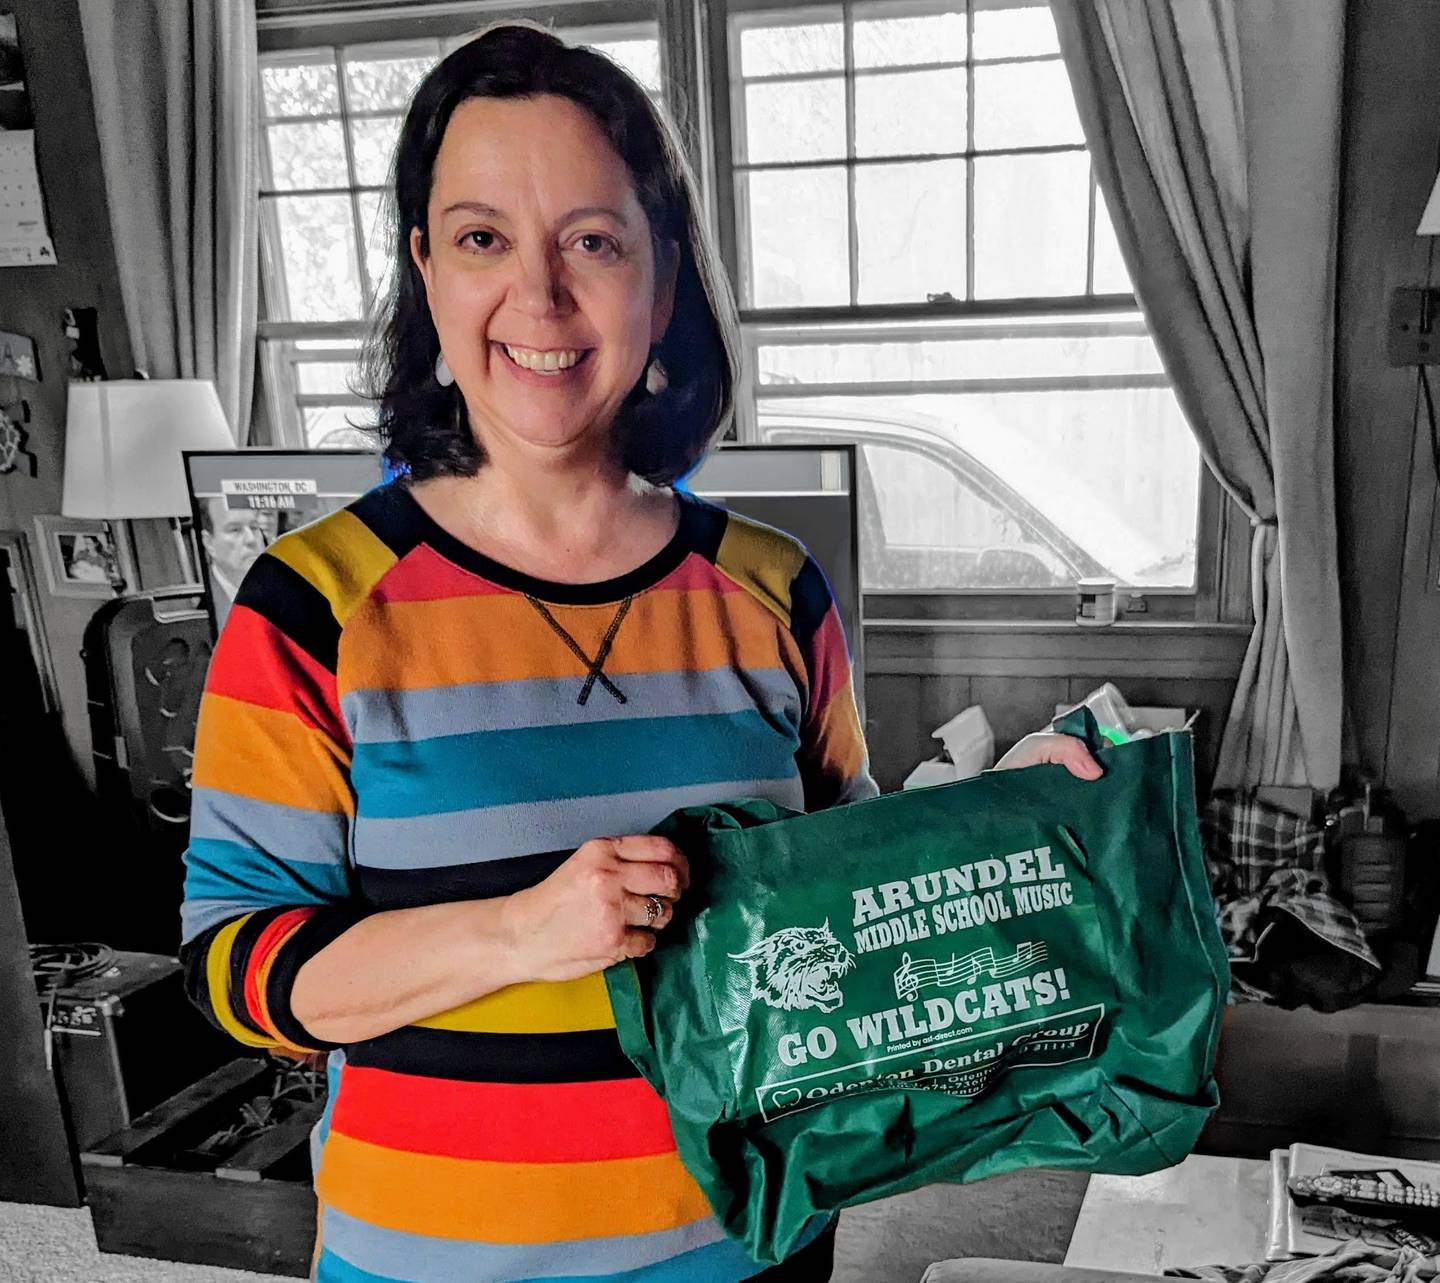 County Councilwoman Lisa Rodvien has a growing collection of reusable bags. A new plastic bag ban in Anne Arundel County means lots of other people will be starting their own.